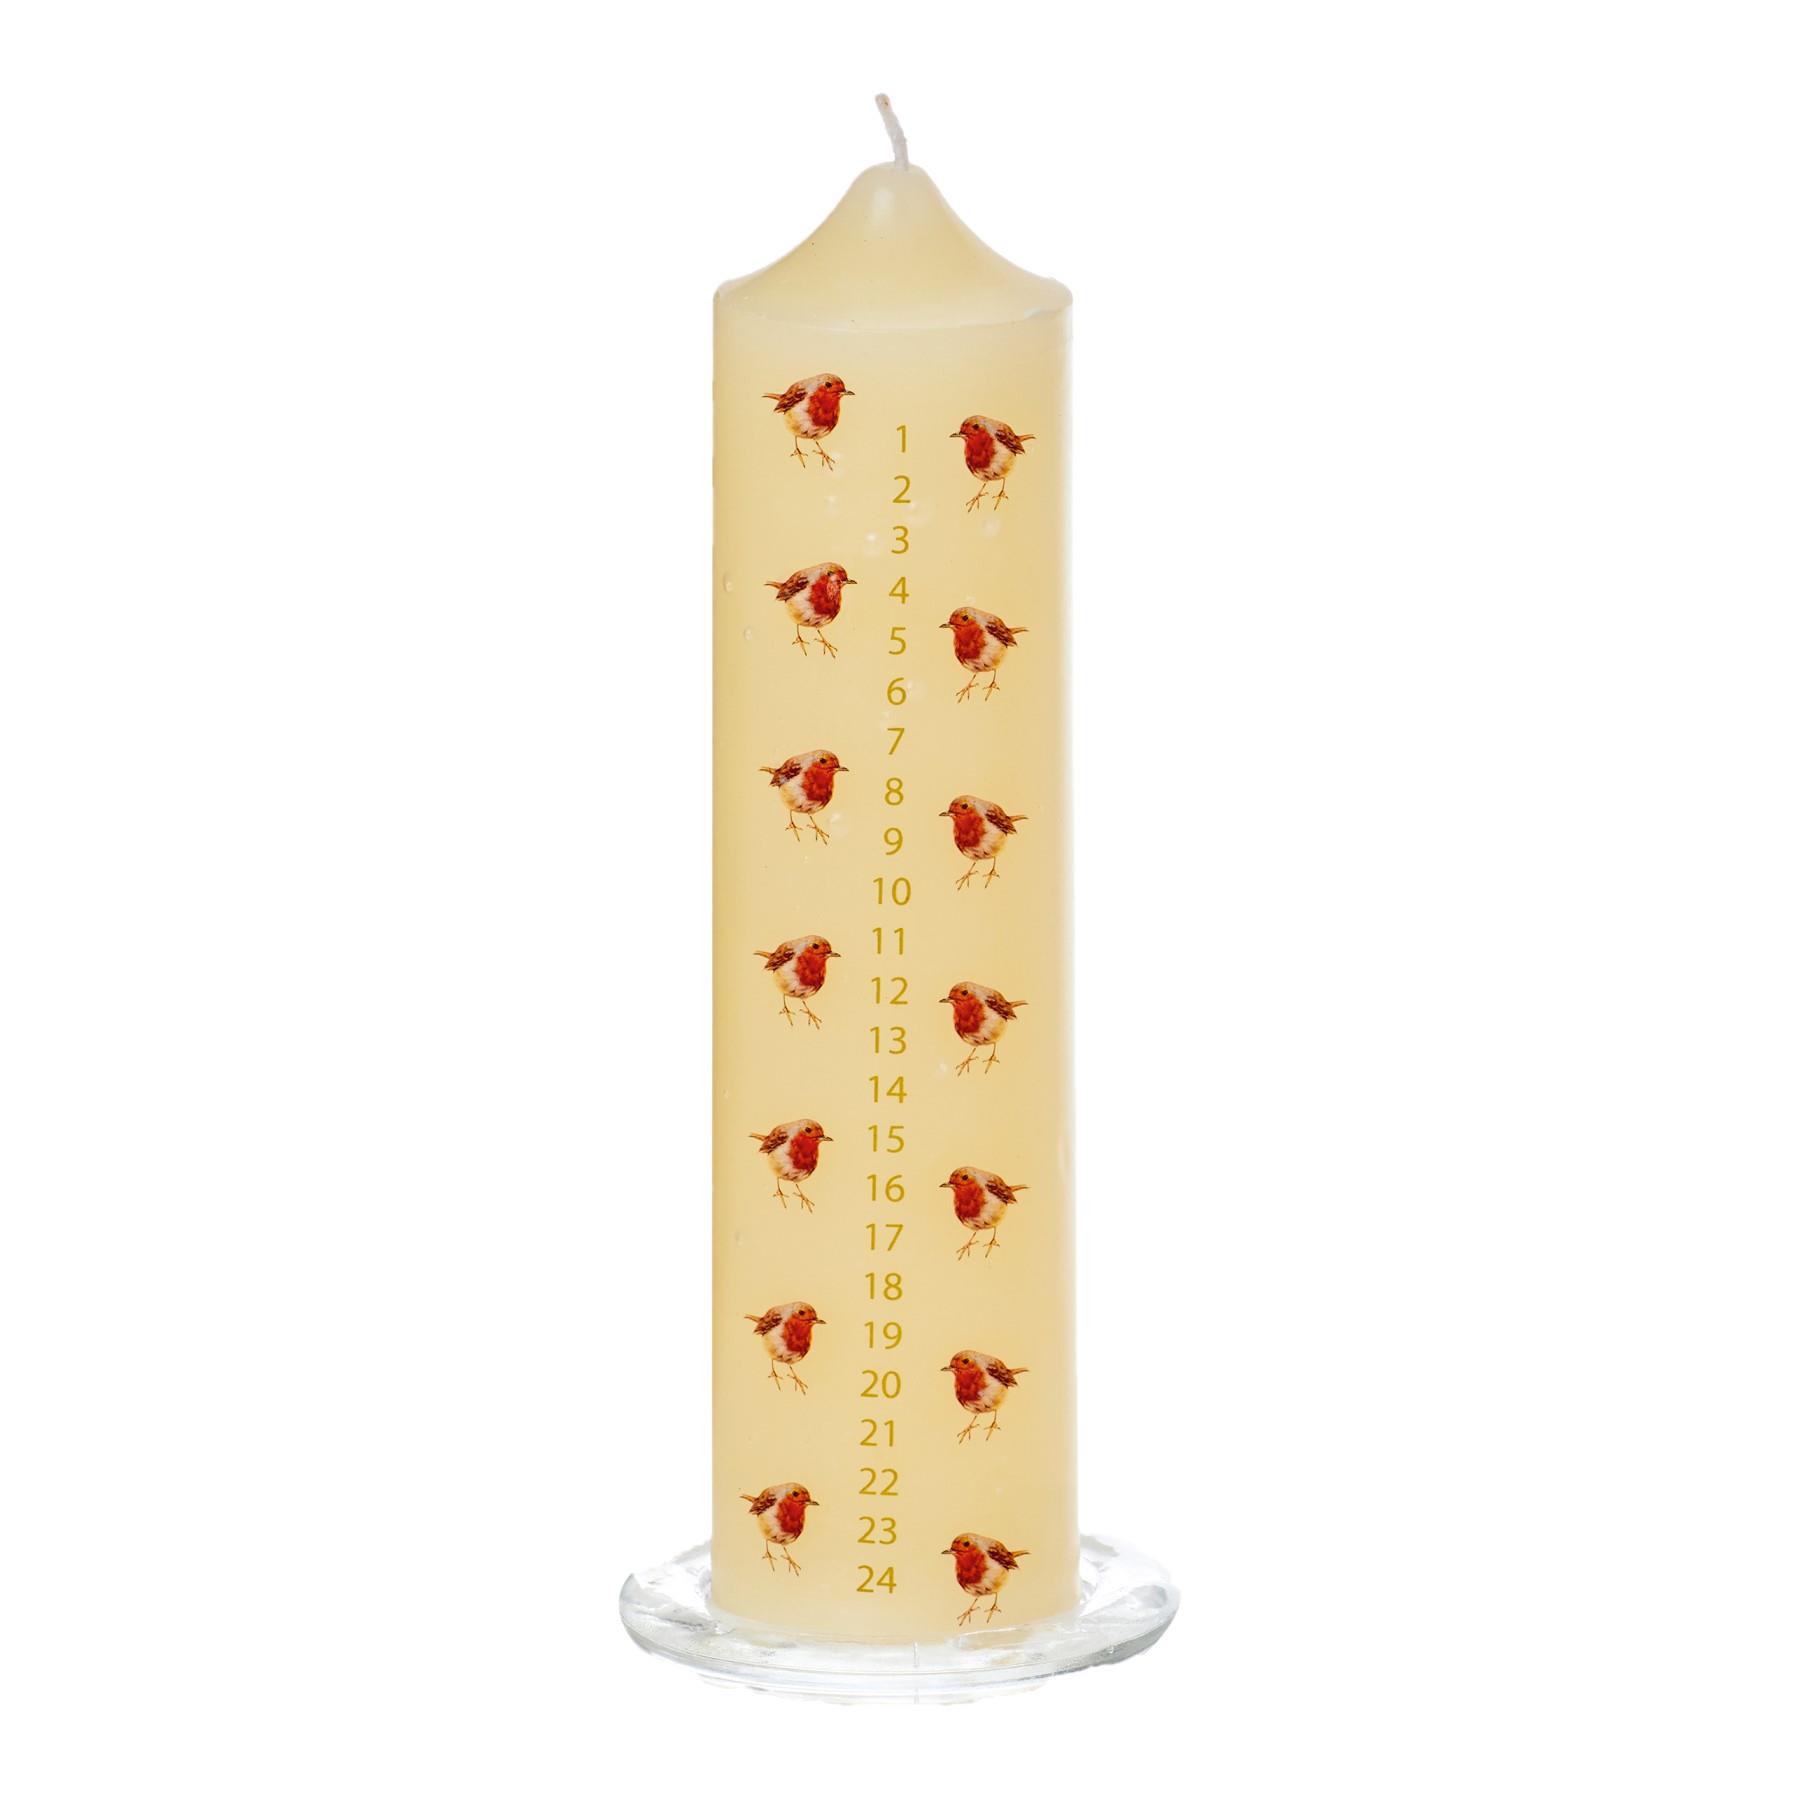 20cm Christmas Advent Candle with Robin Image on Glass Tray - Ivory